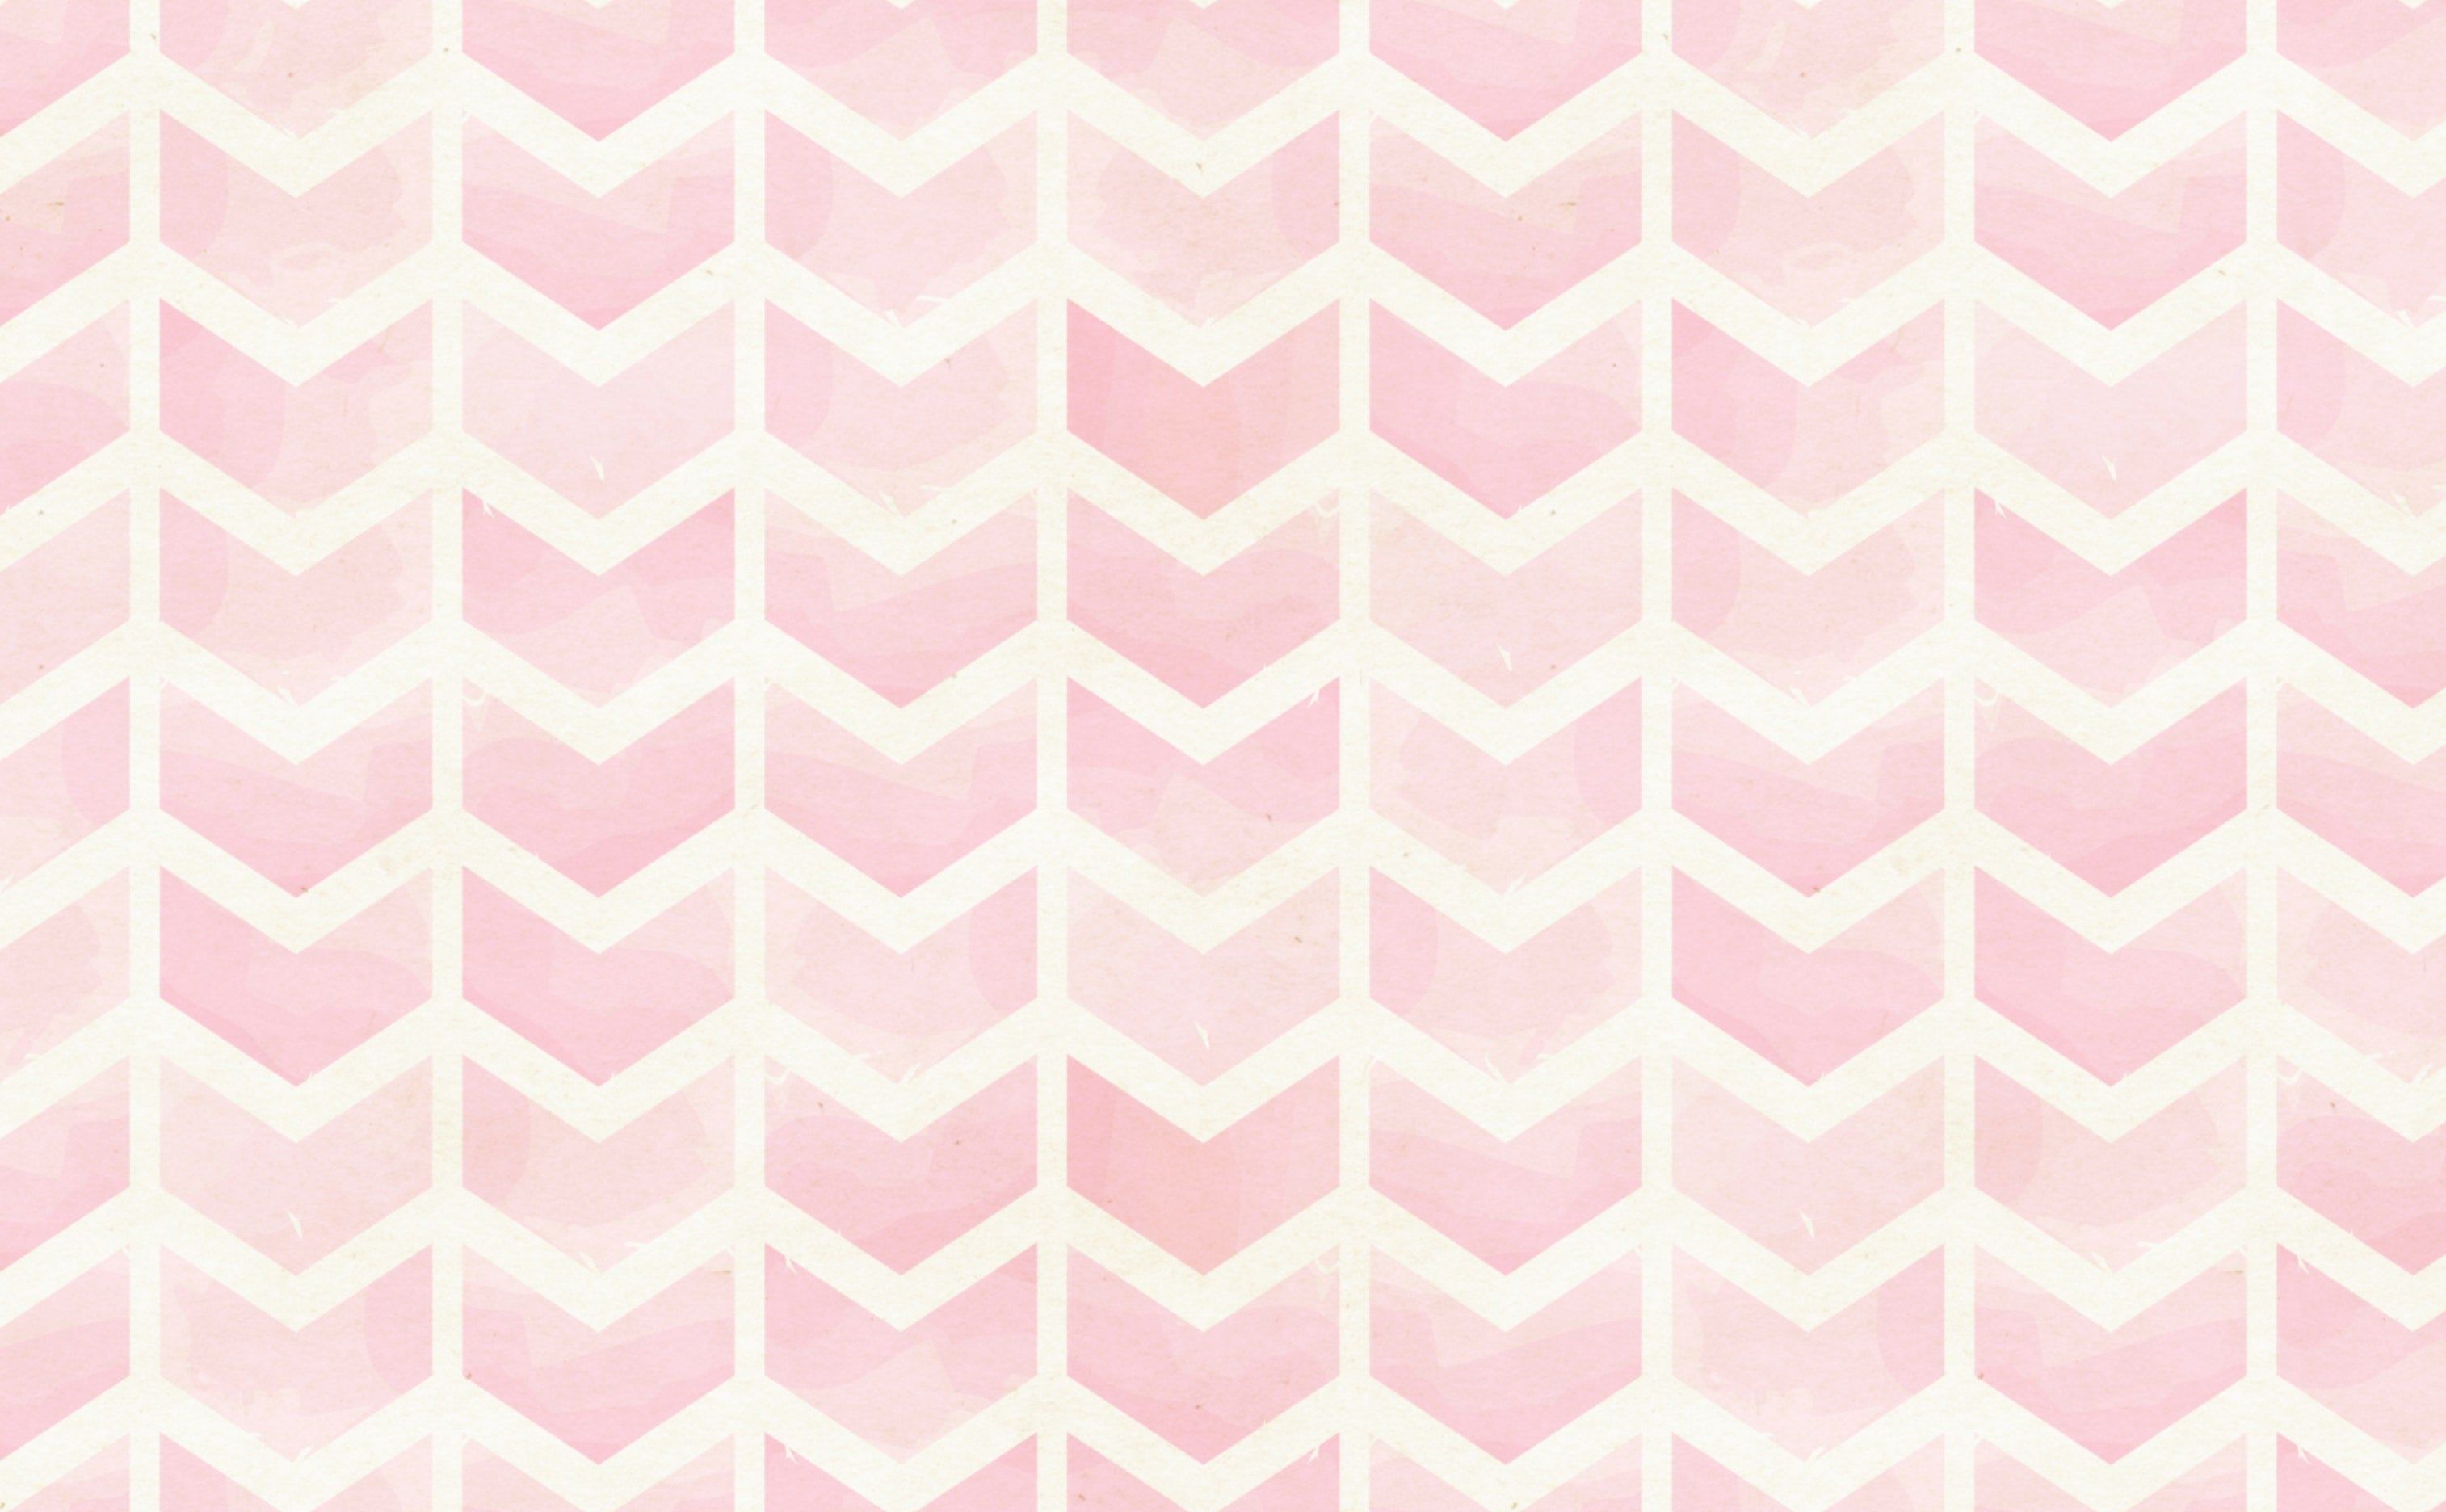 A pattern of pink and white chevrons on a white background - Pink, hot pink, cute pink, pattern, blush